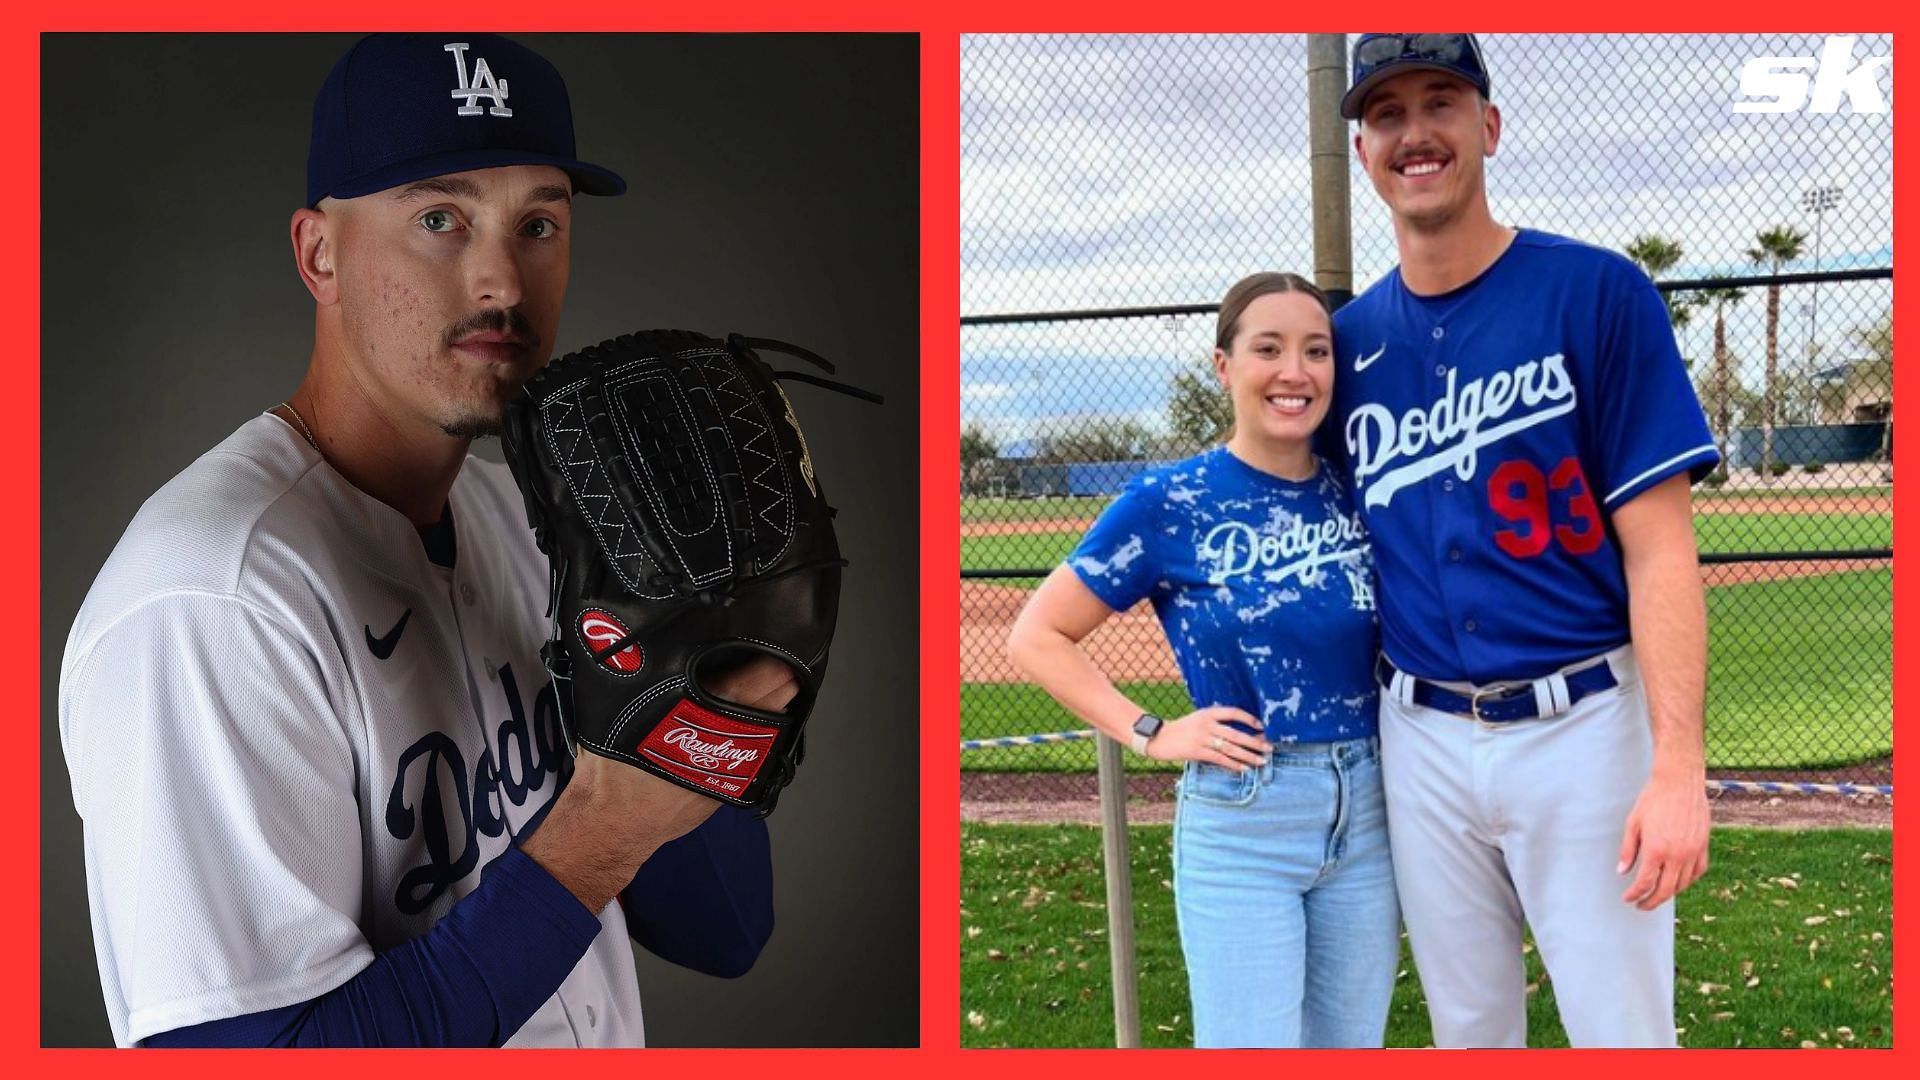 Chloe Cororan of 'Being Trans' honored at Dodgers Pride Night event